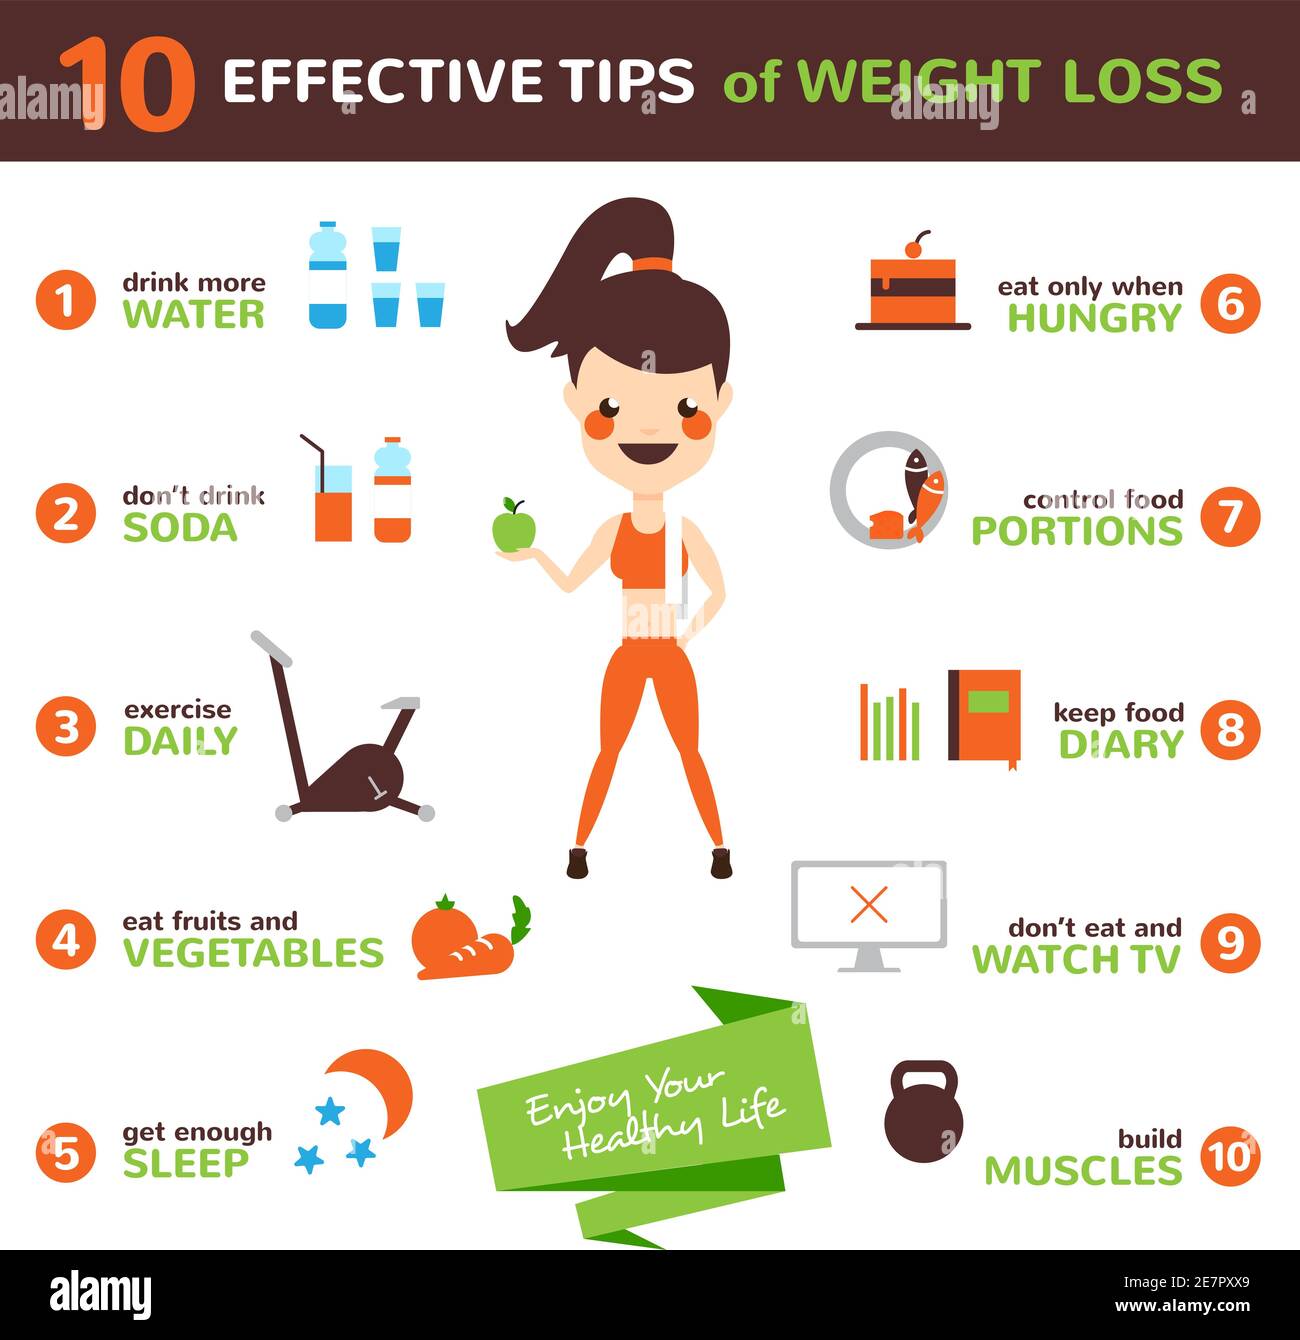 20 Best Weight Loss Tips - Blog - HealthifyMe